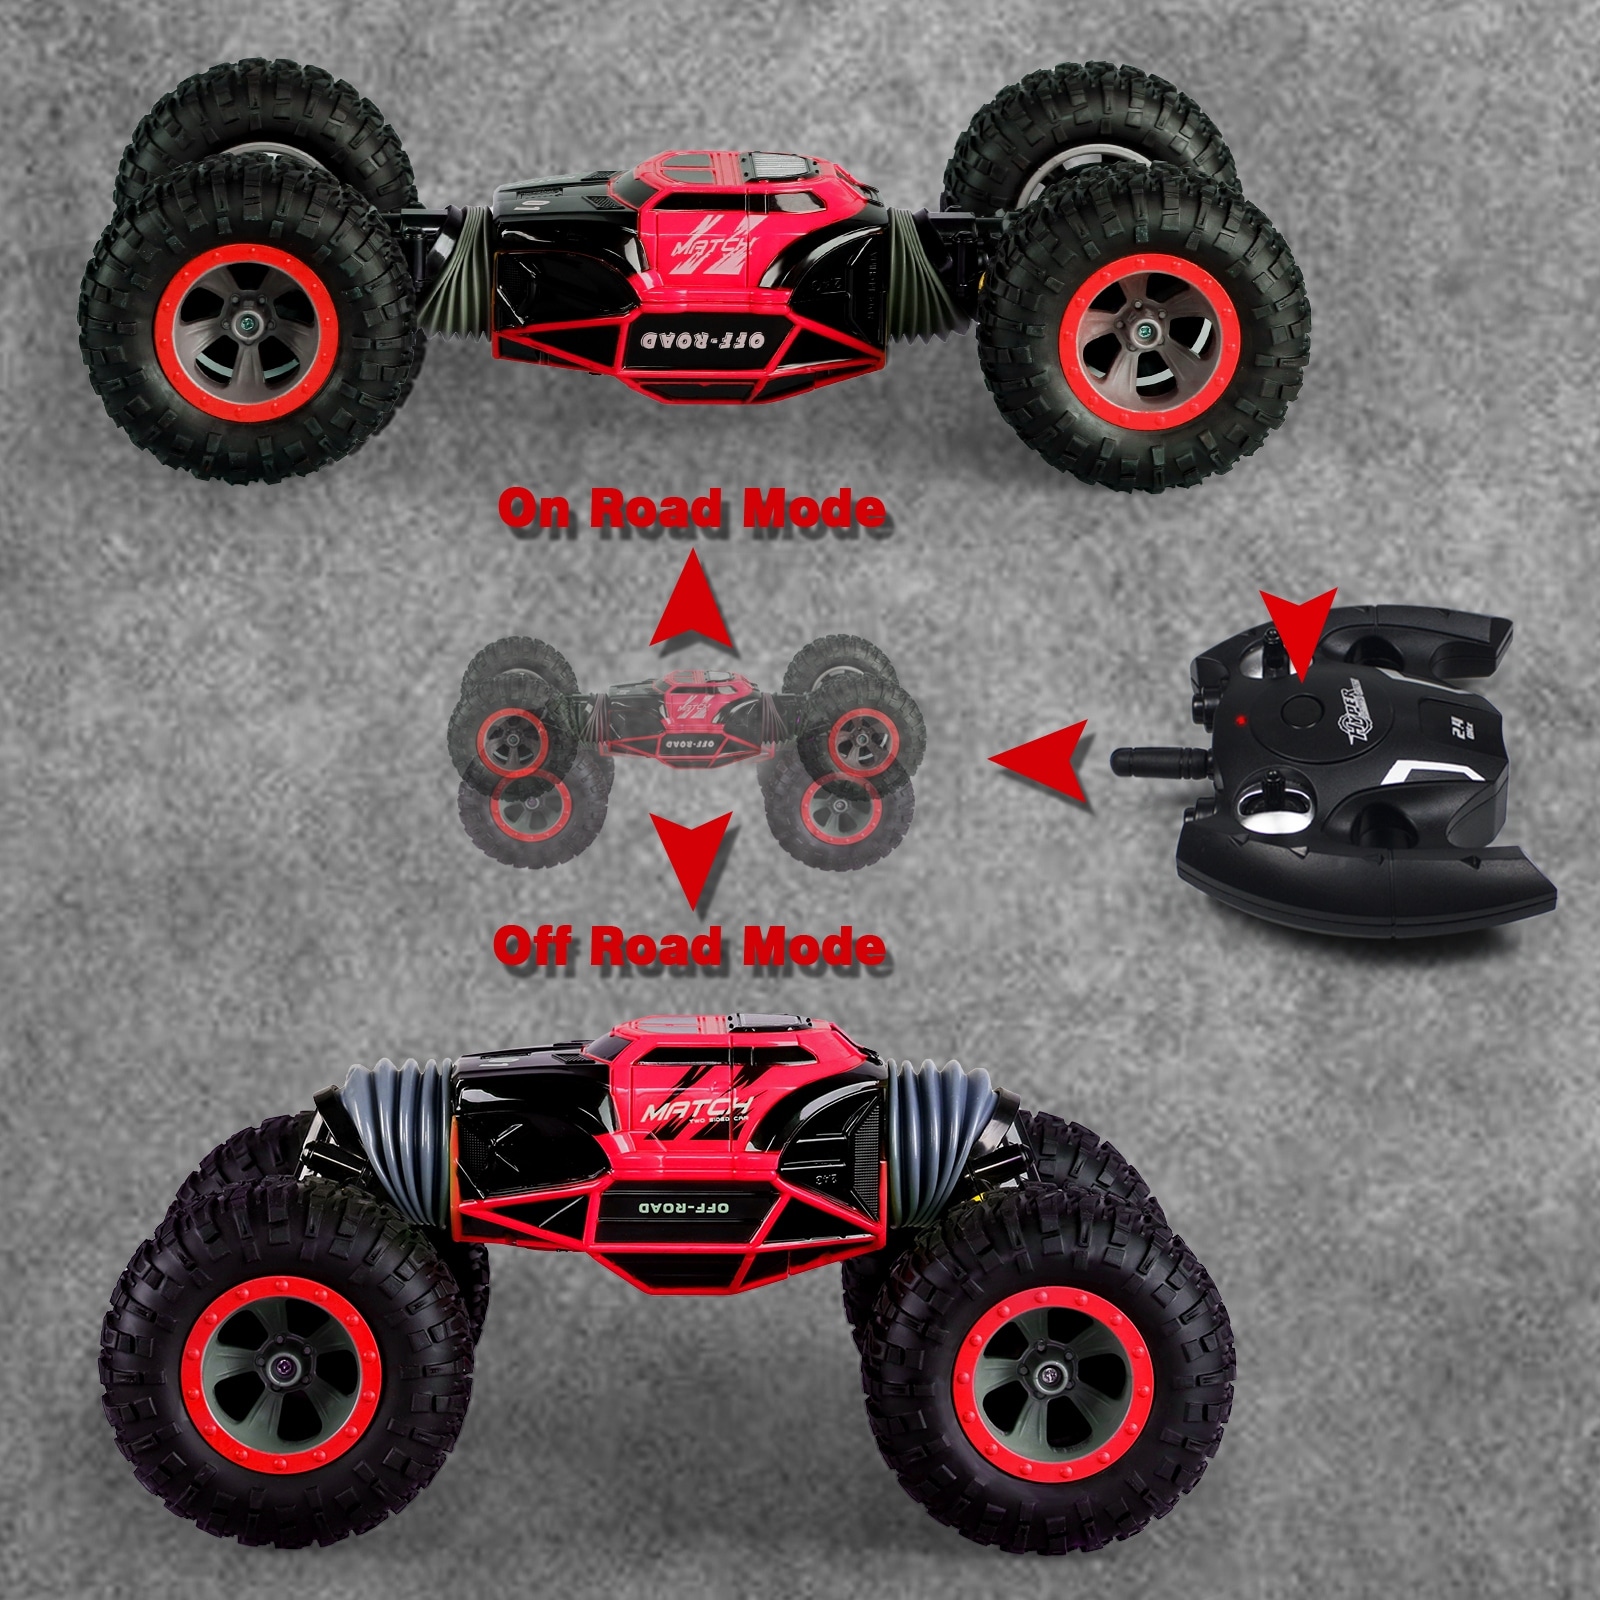 double sided stunt rc car